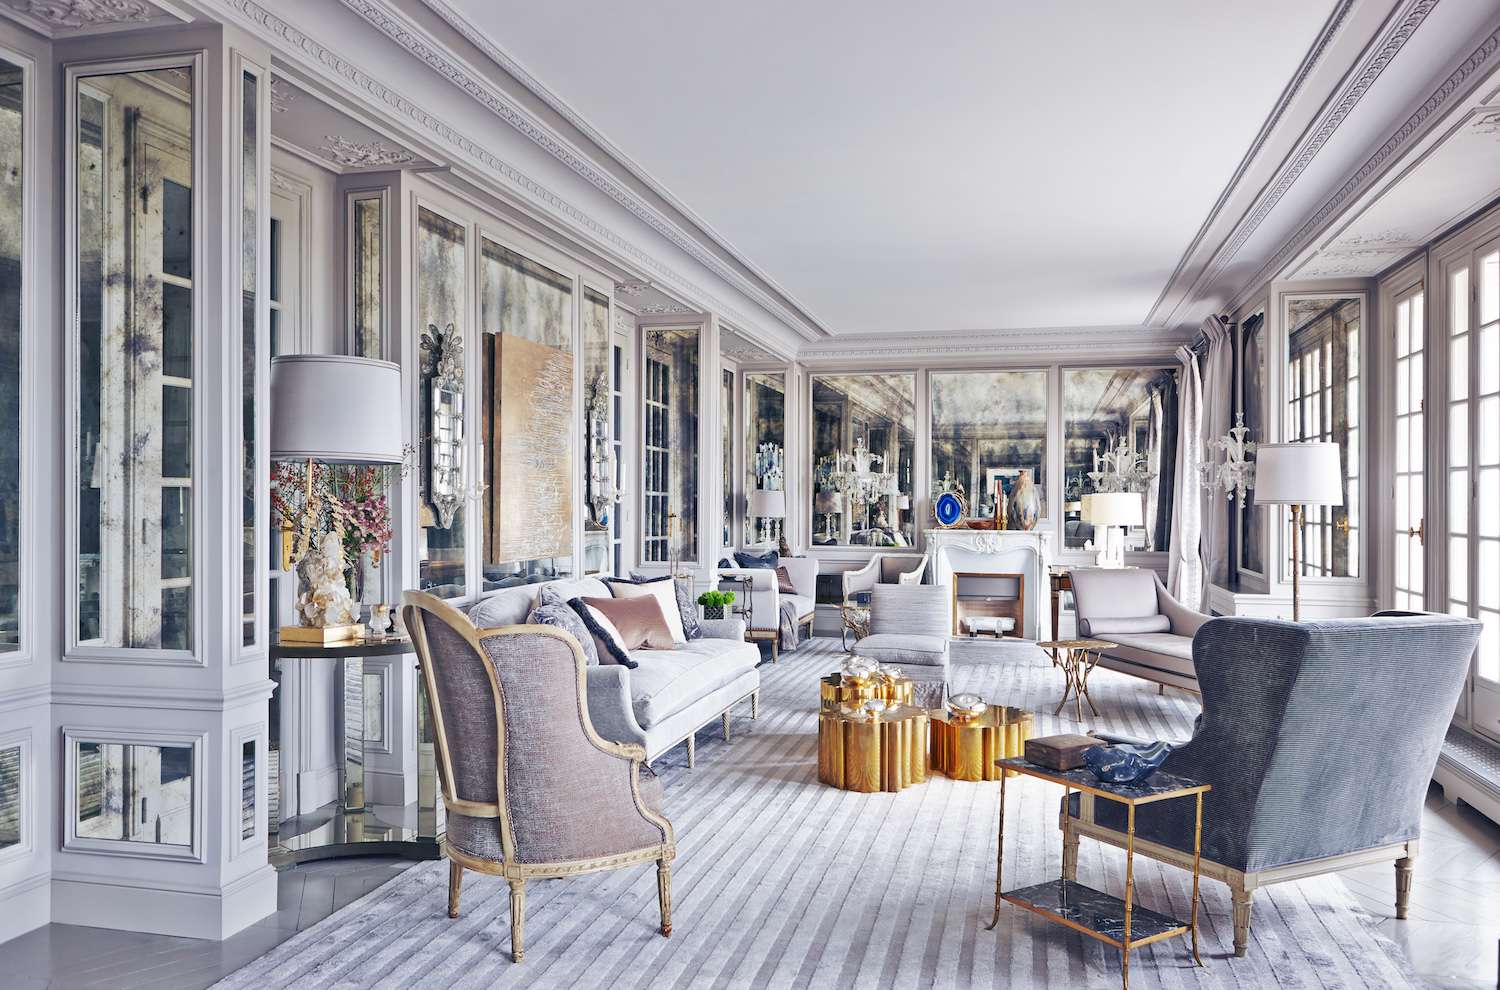 The New Chic: French Style from Today’s Leading Interior Designers